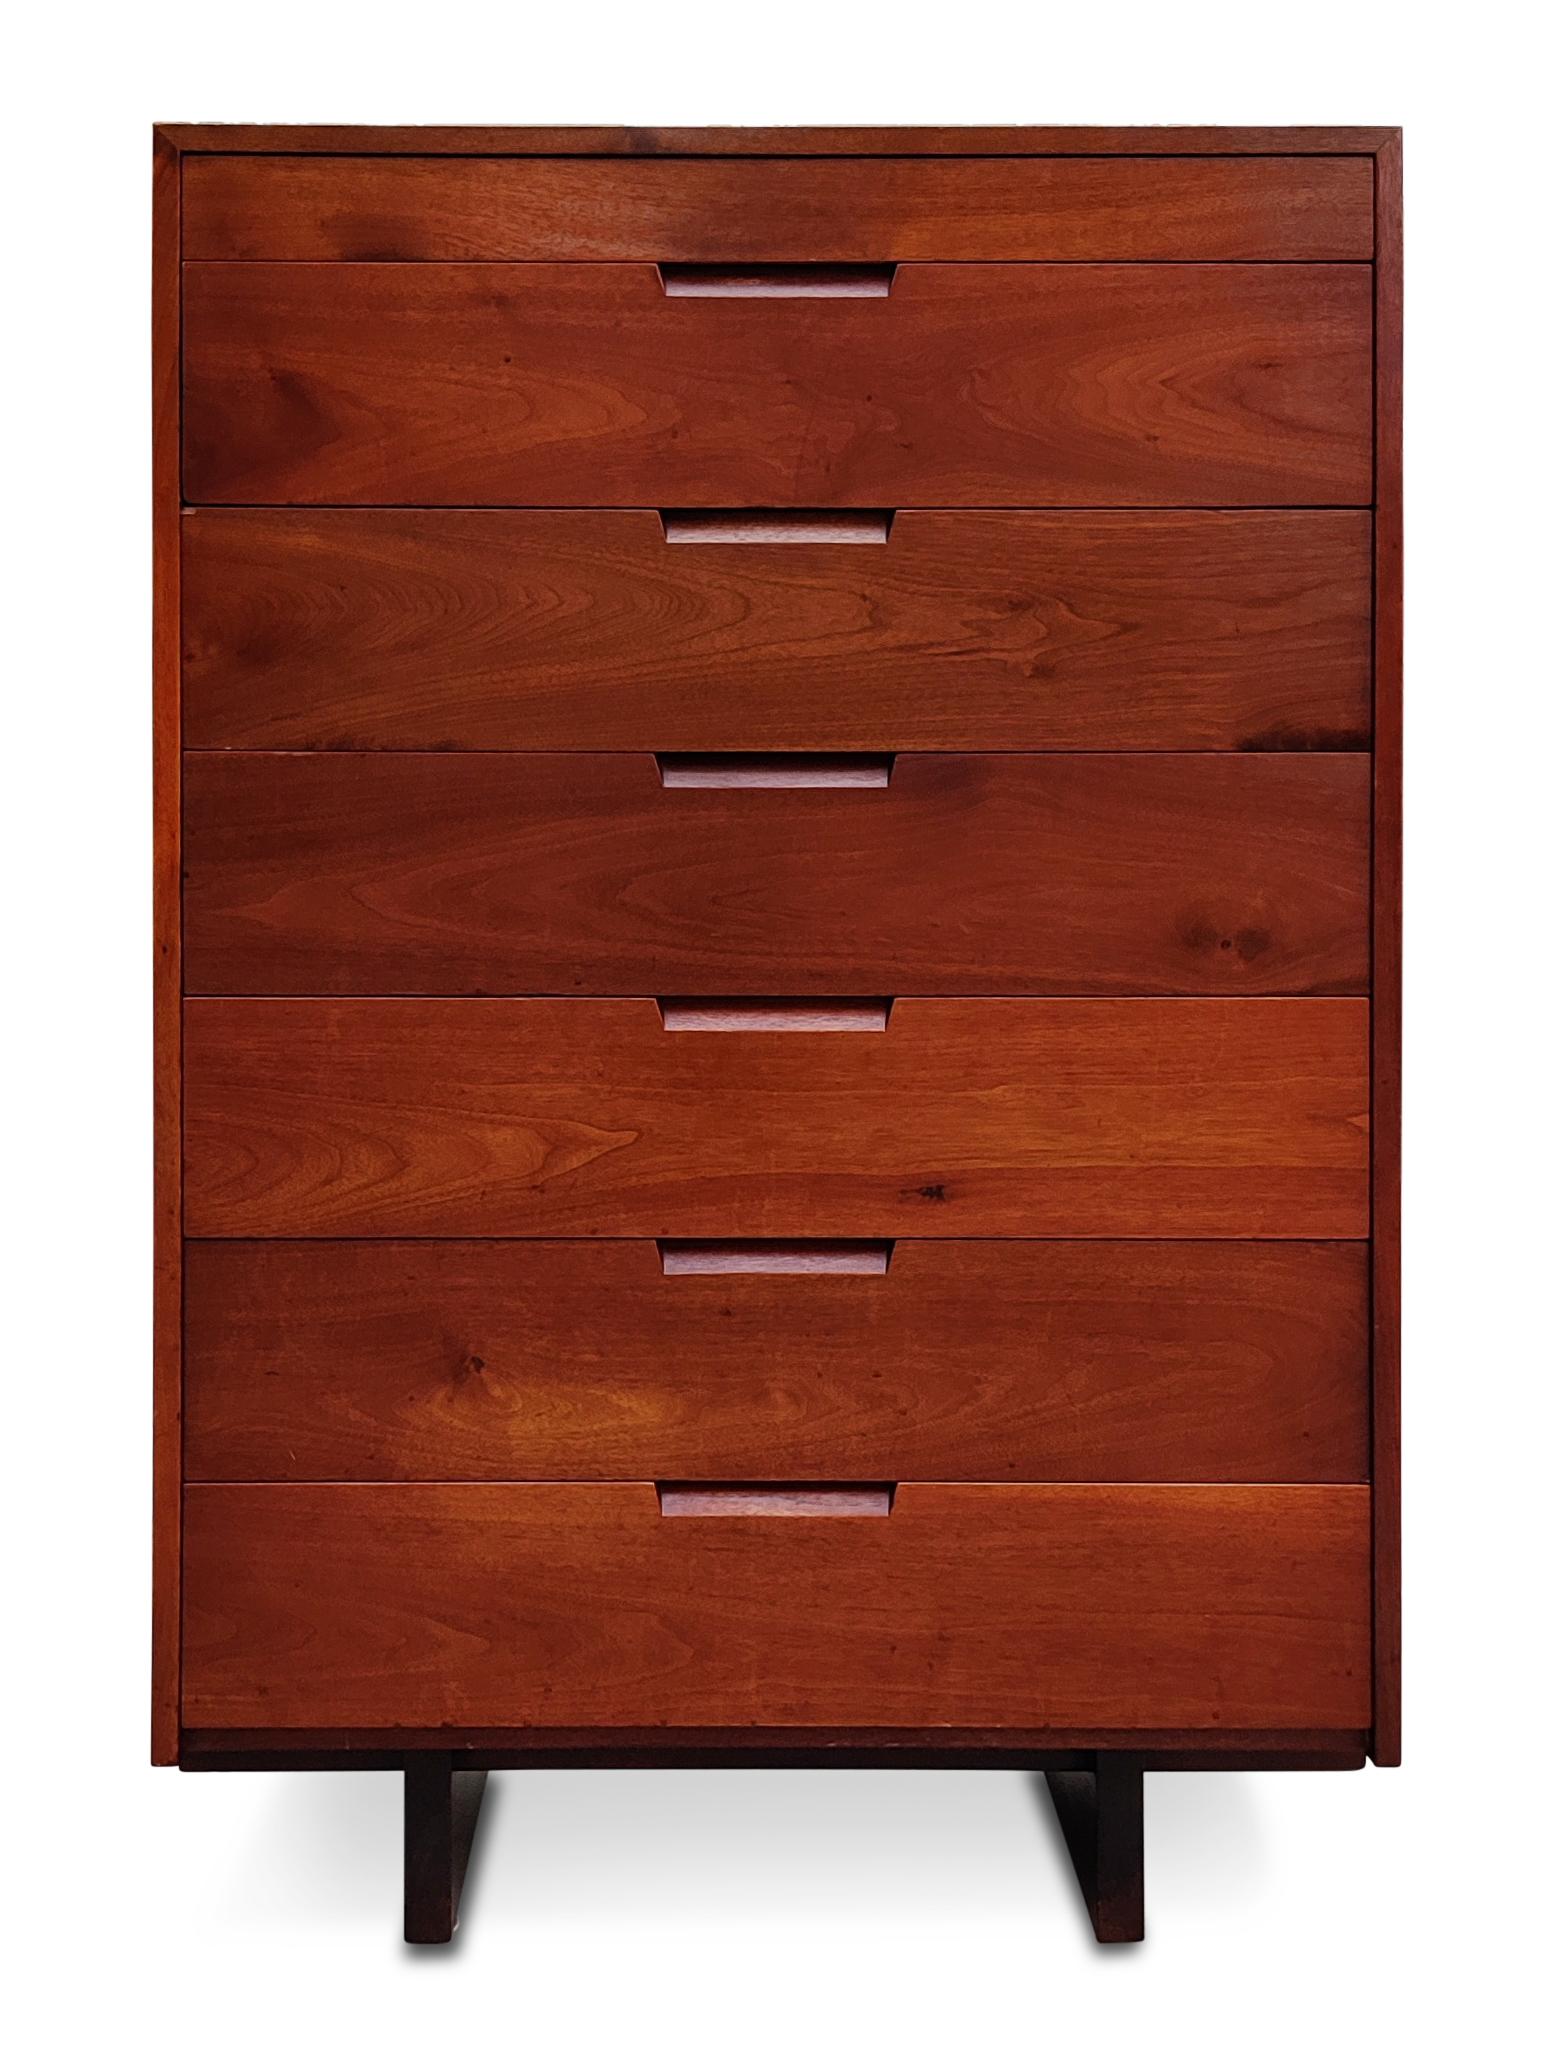 Outstanding execution and simplicity of design leaving the wood to speak for itself as Nakashima always strived for. Features seven drawers with rich dark walnut grain details to top and sides. Prominent dovetail joinery on top and sides. The